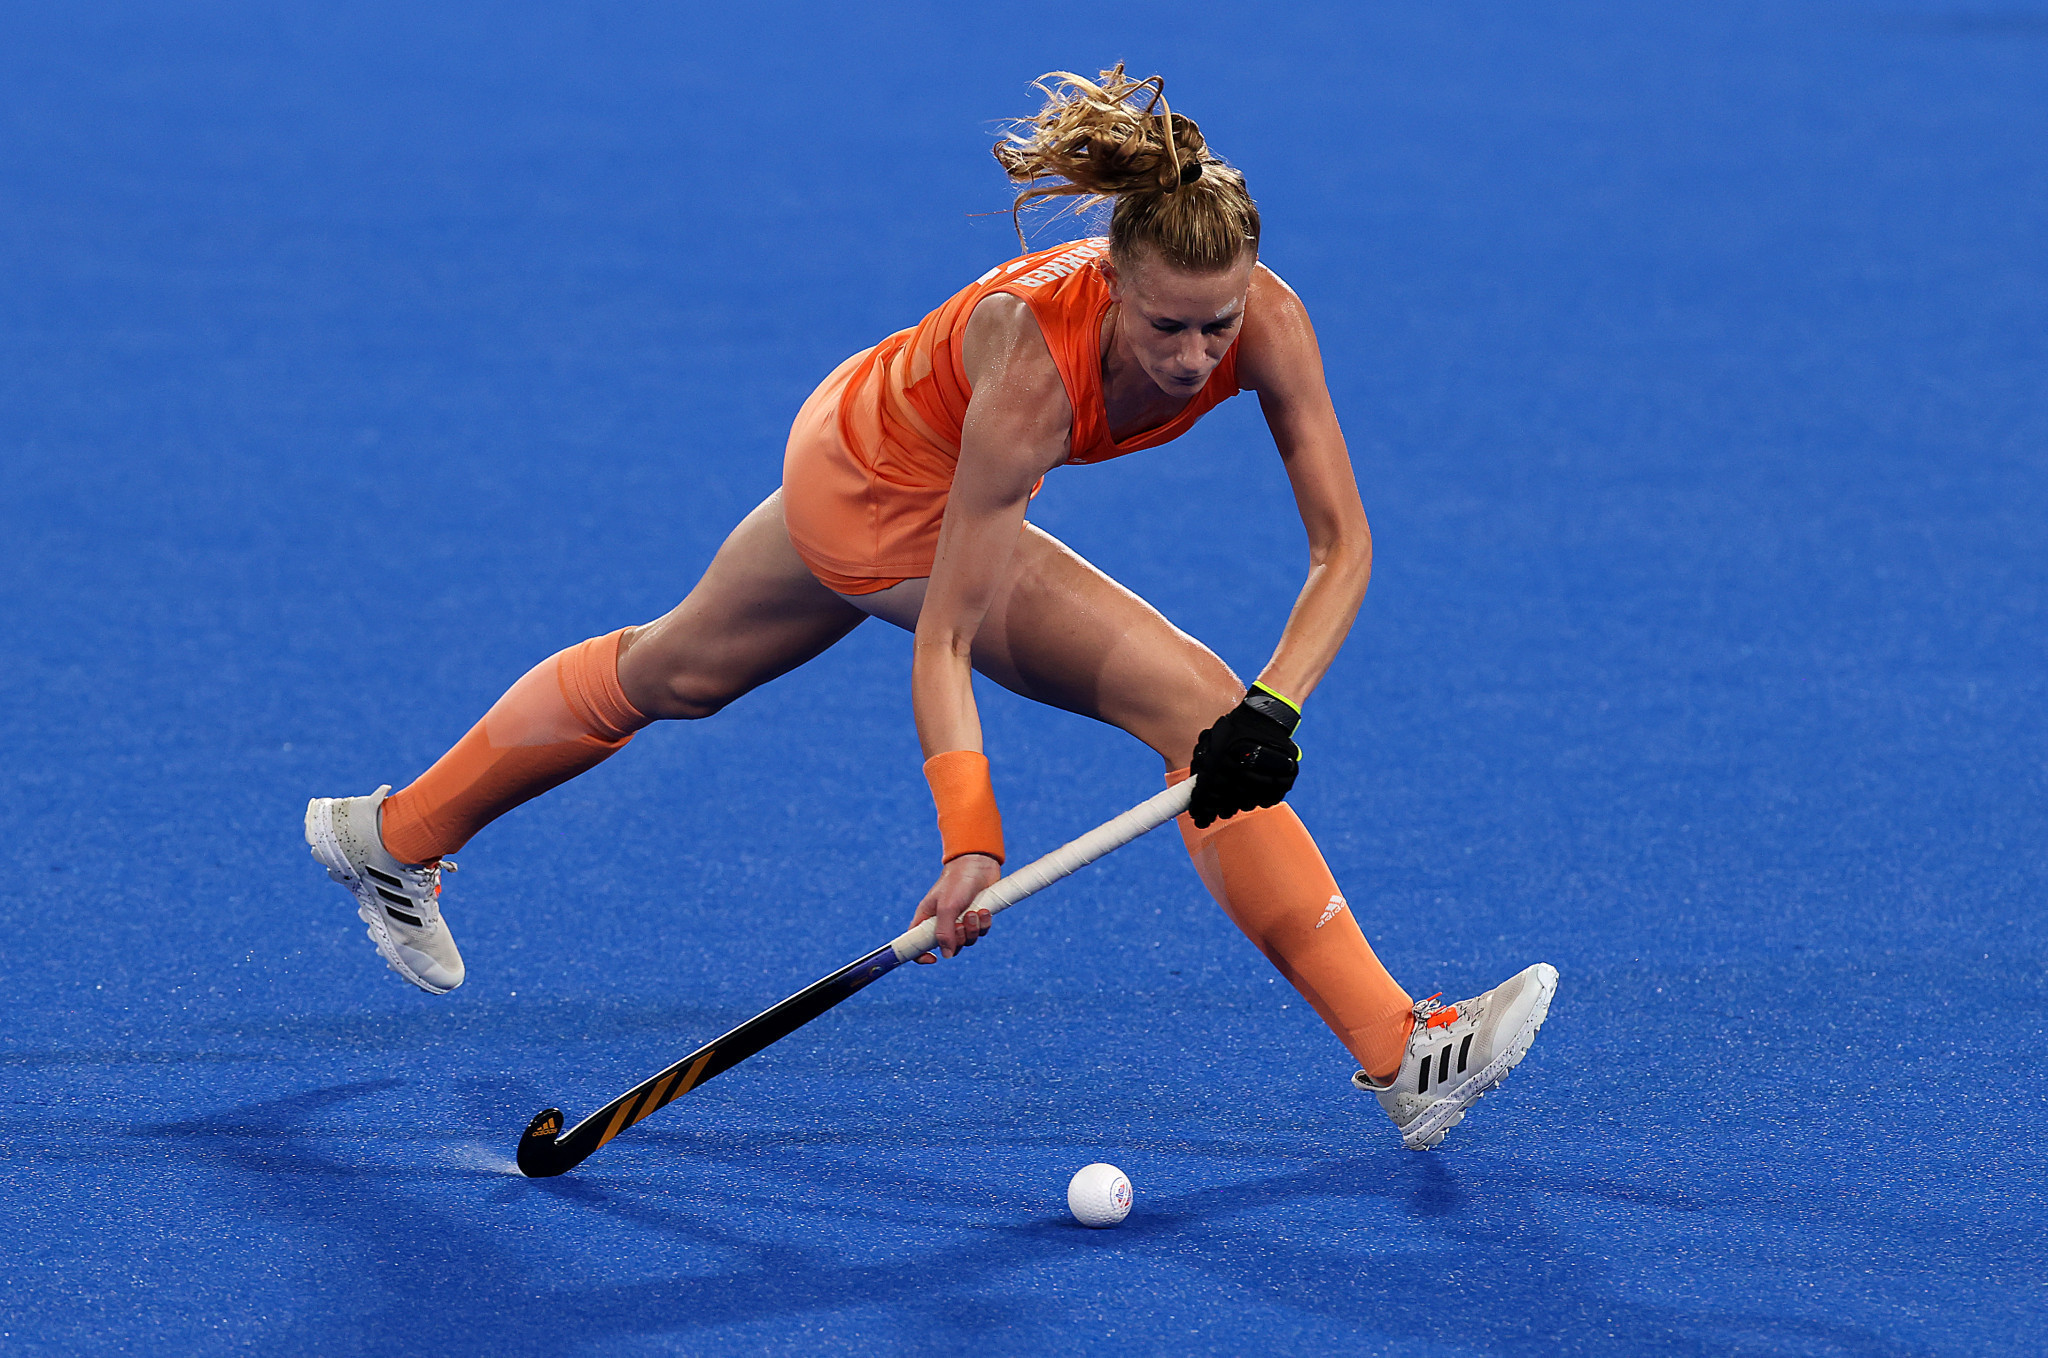 The Netherlands secure second in Women's FIH Pro League with China thrashing